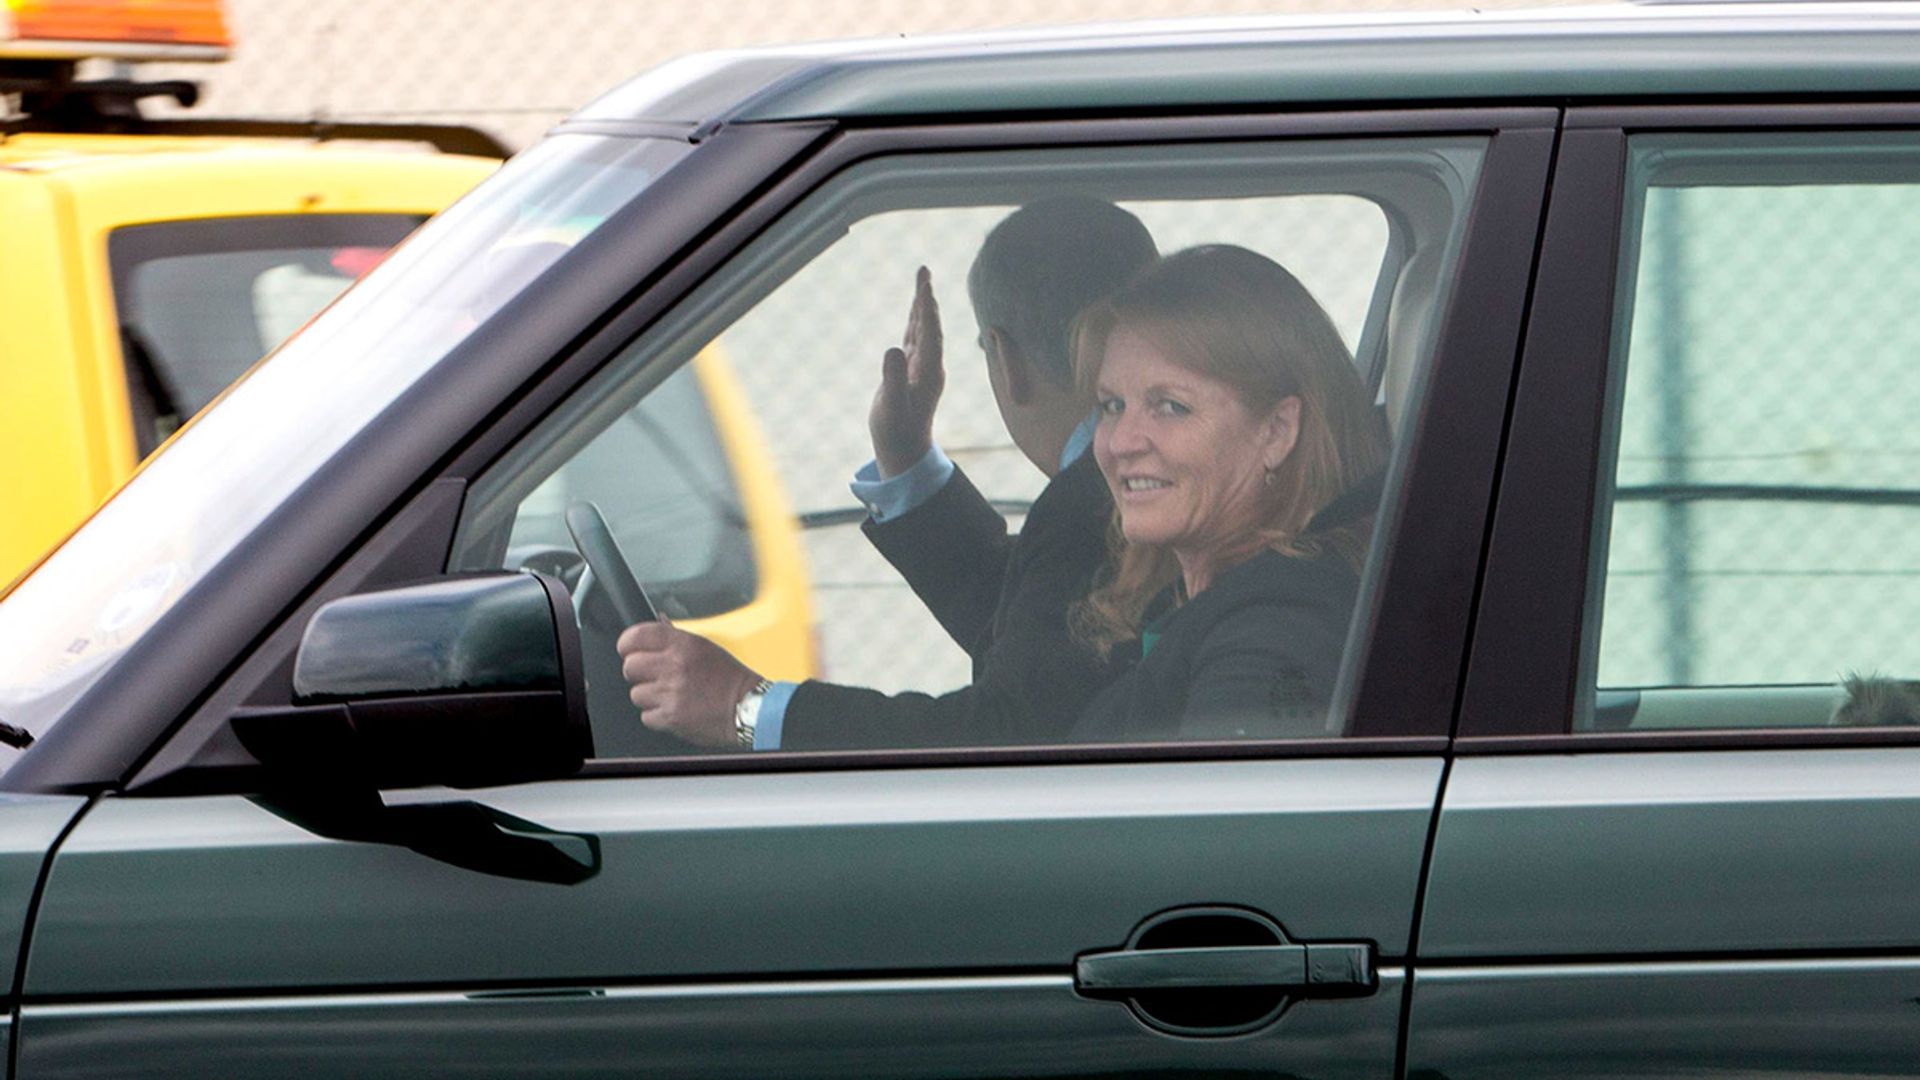 prince andrew and sarah ferguson in car